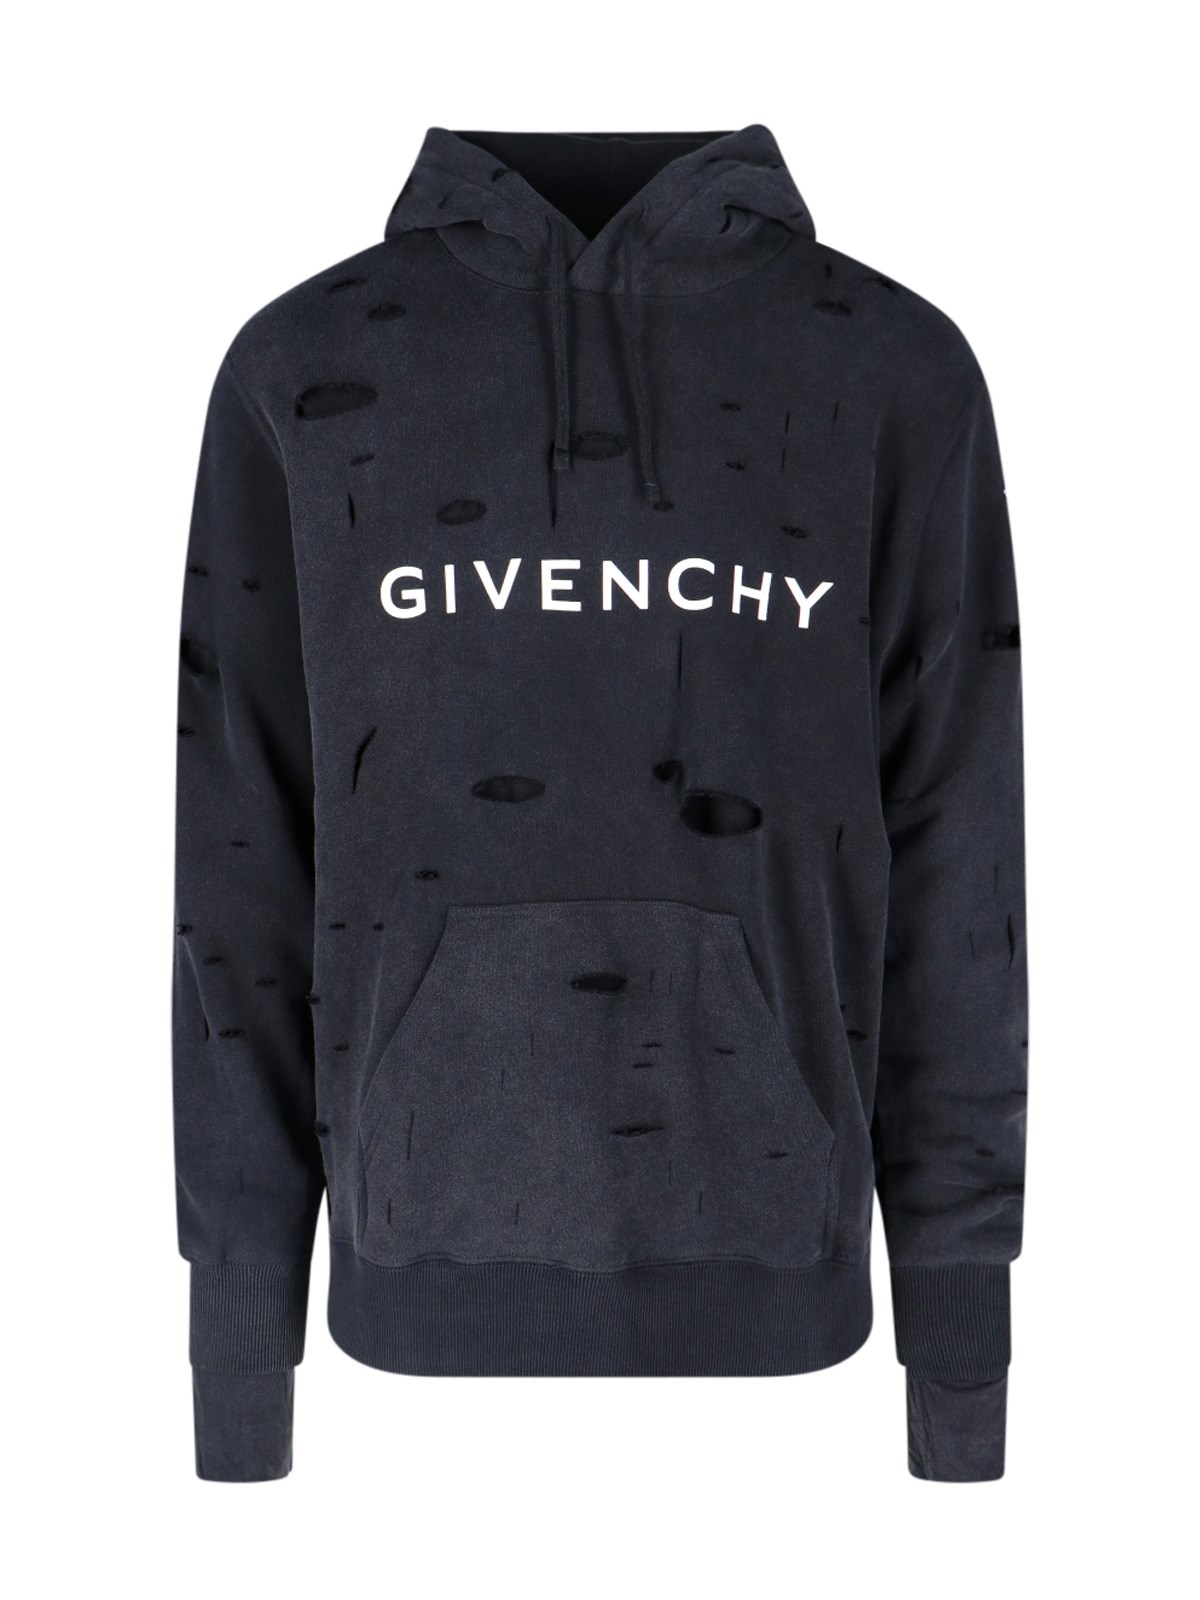 GIVENCHY 'ARCHETYPE' HOODIE